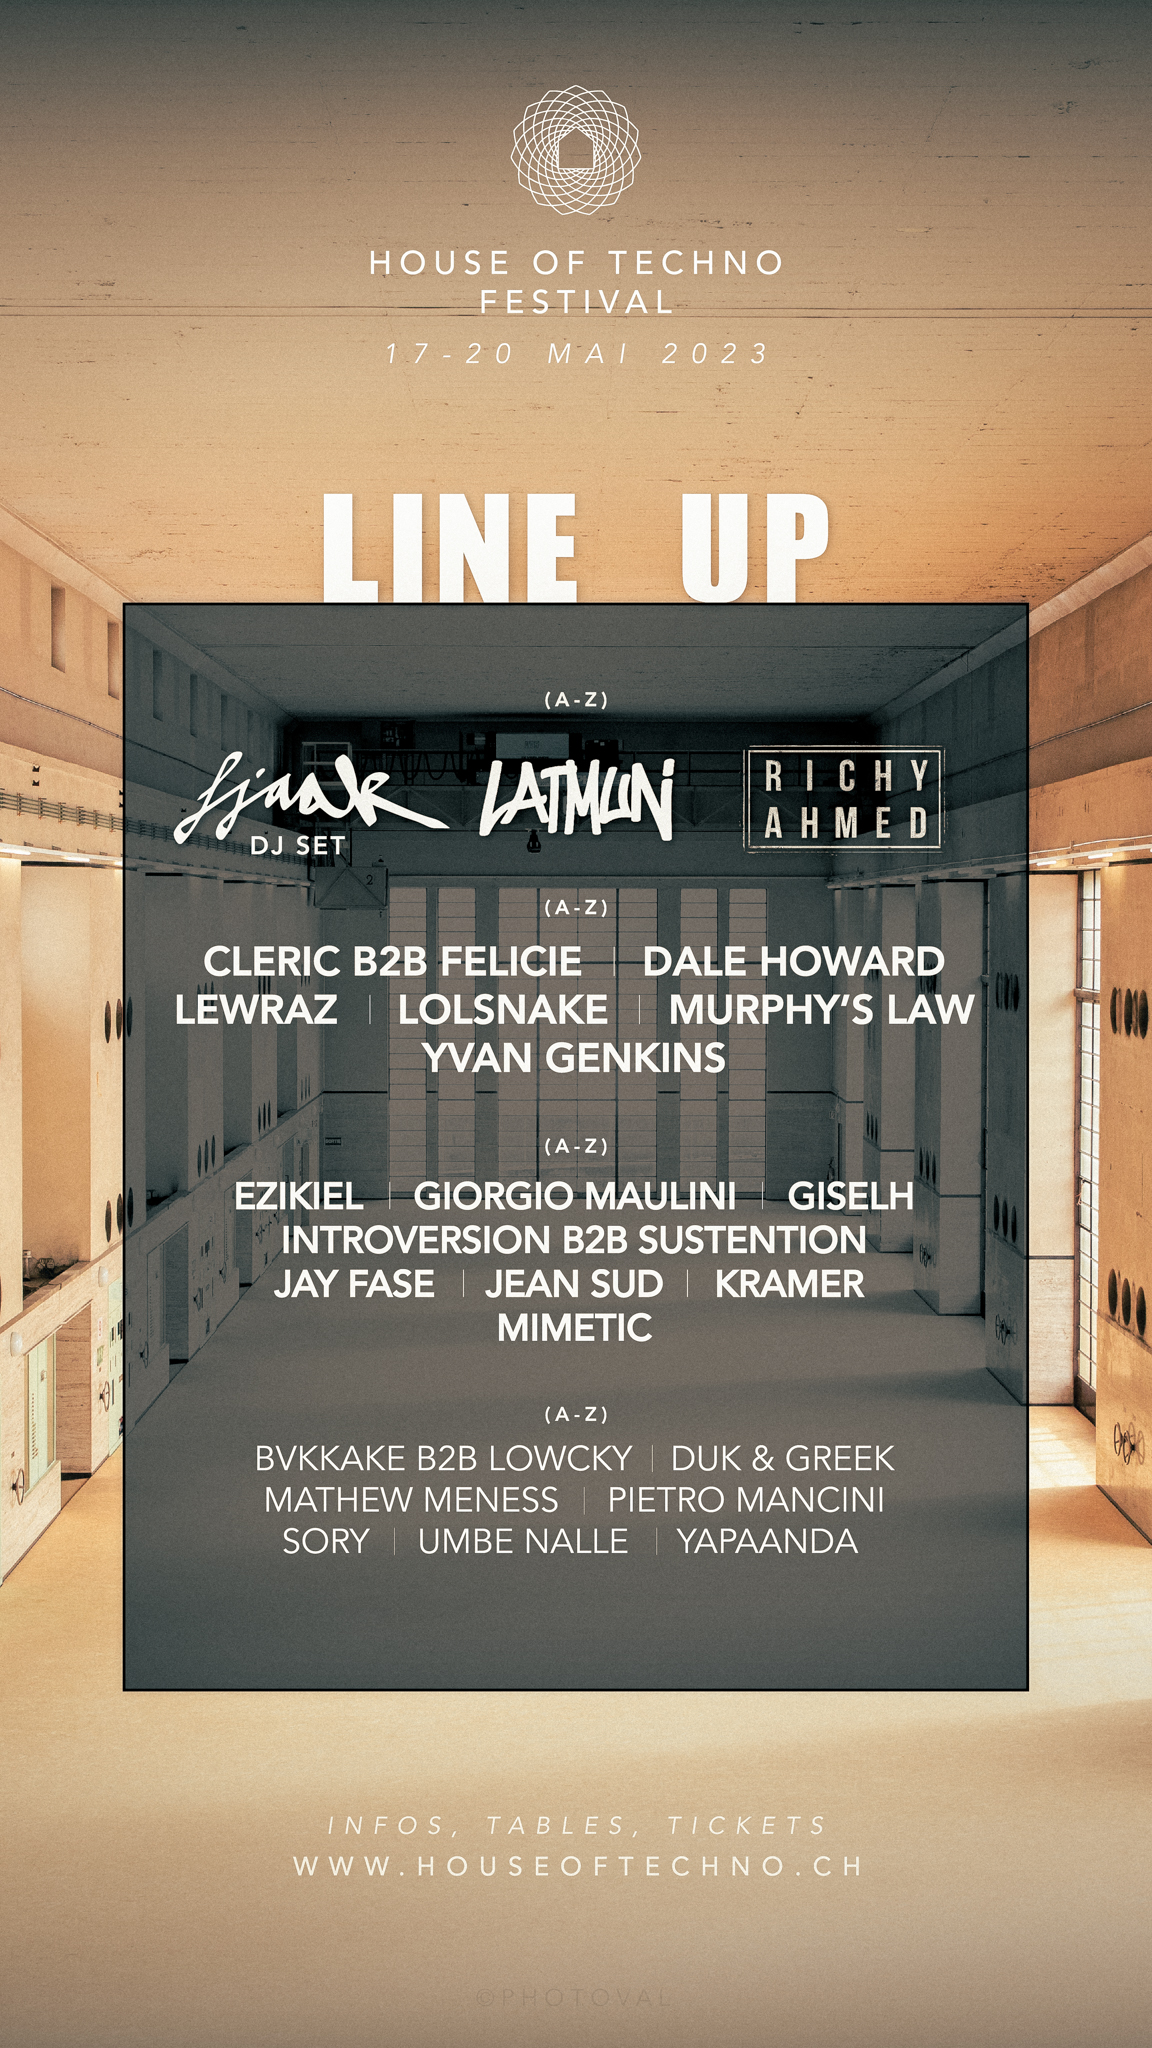 LINEUP_SITE-1